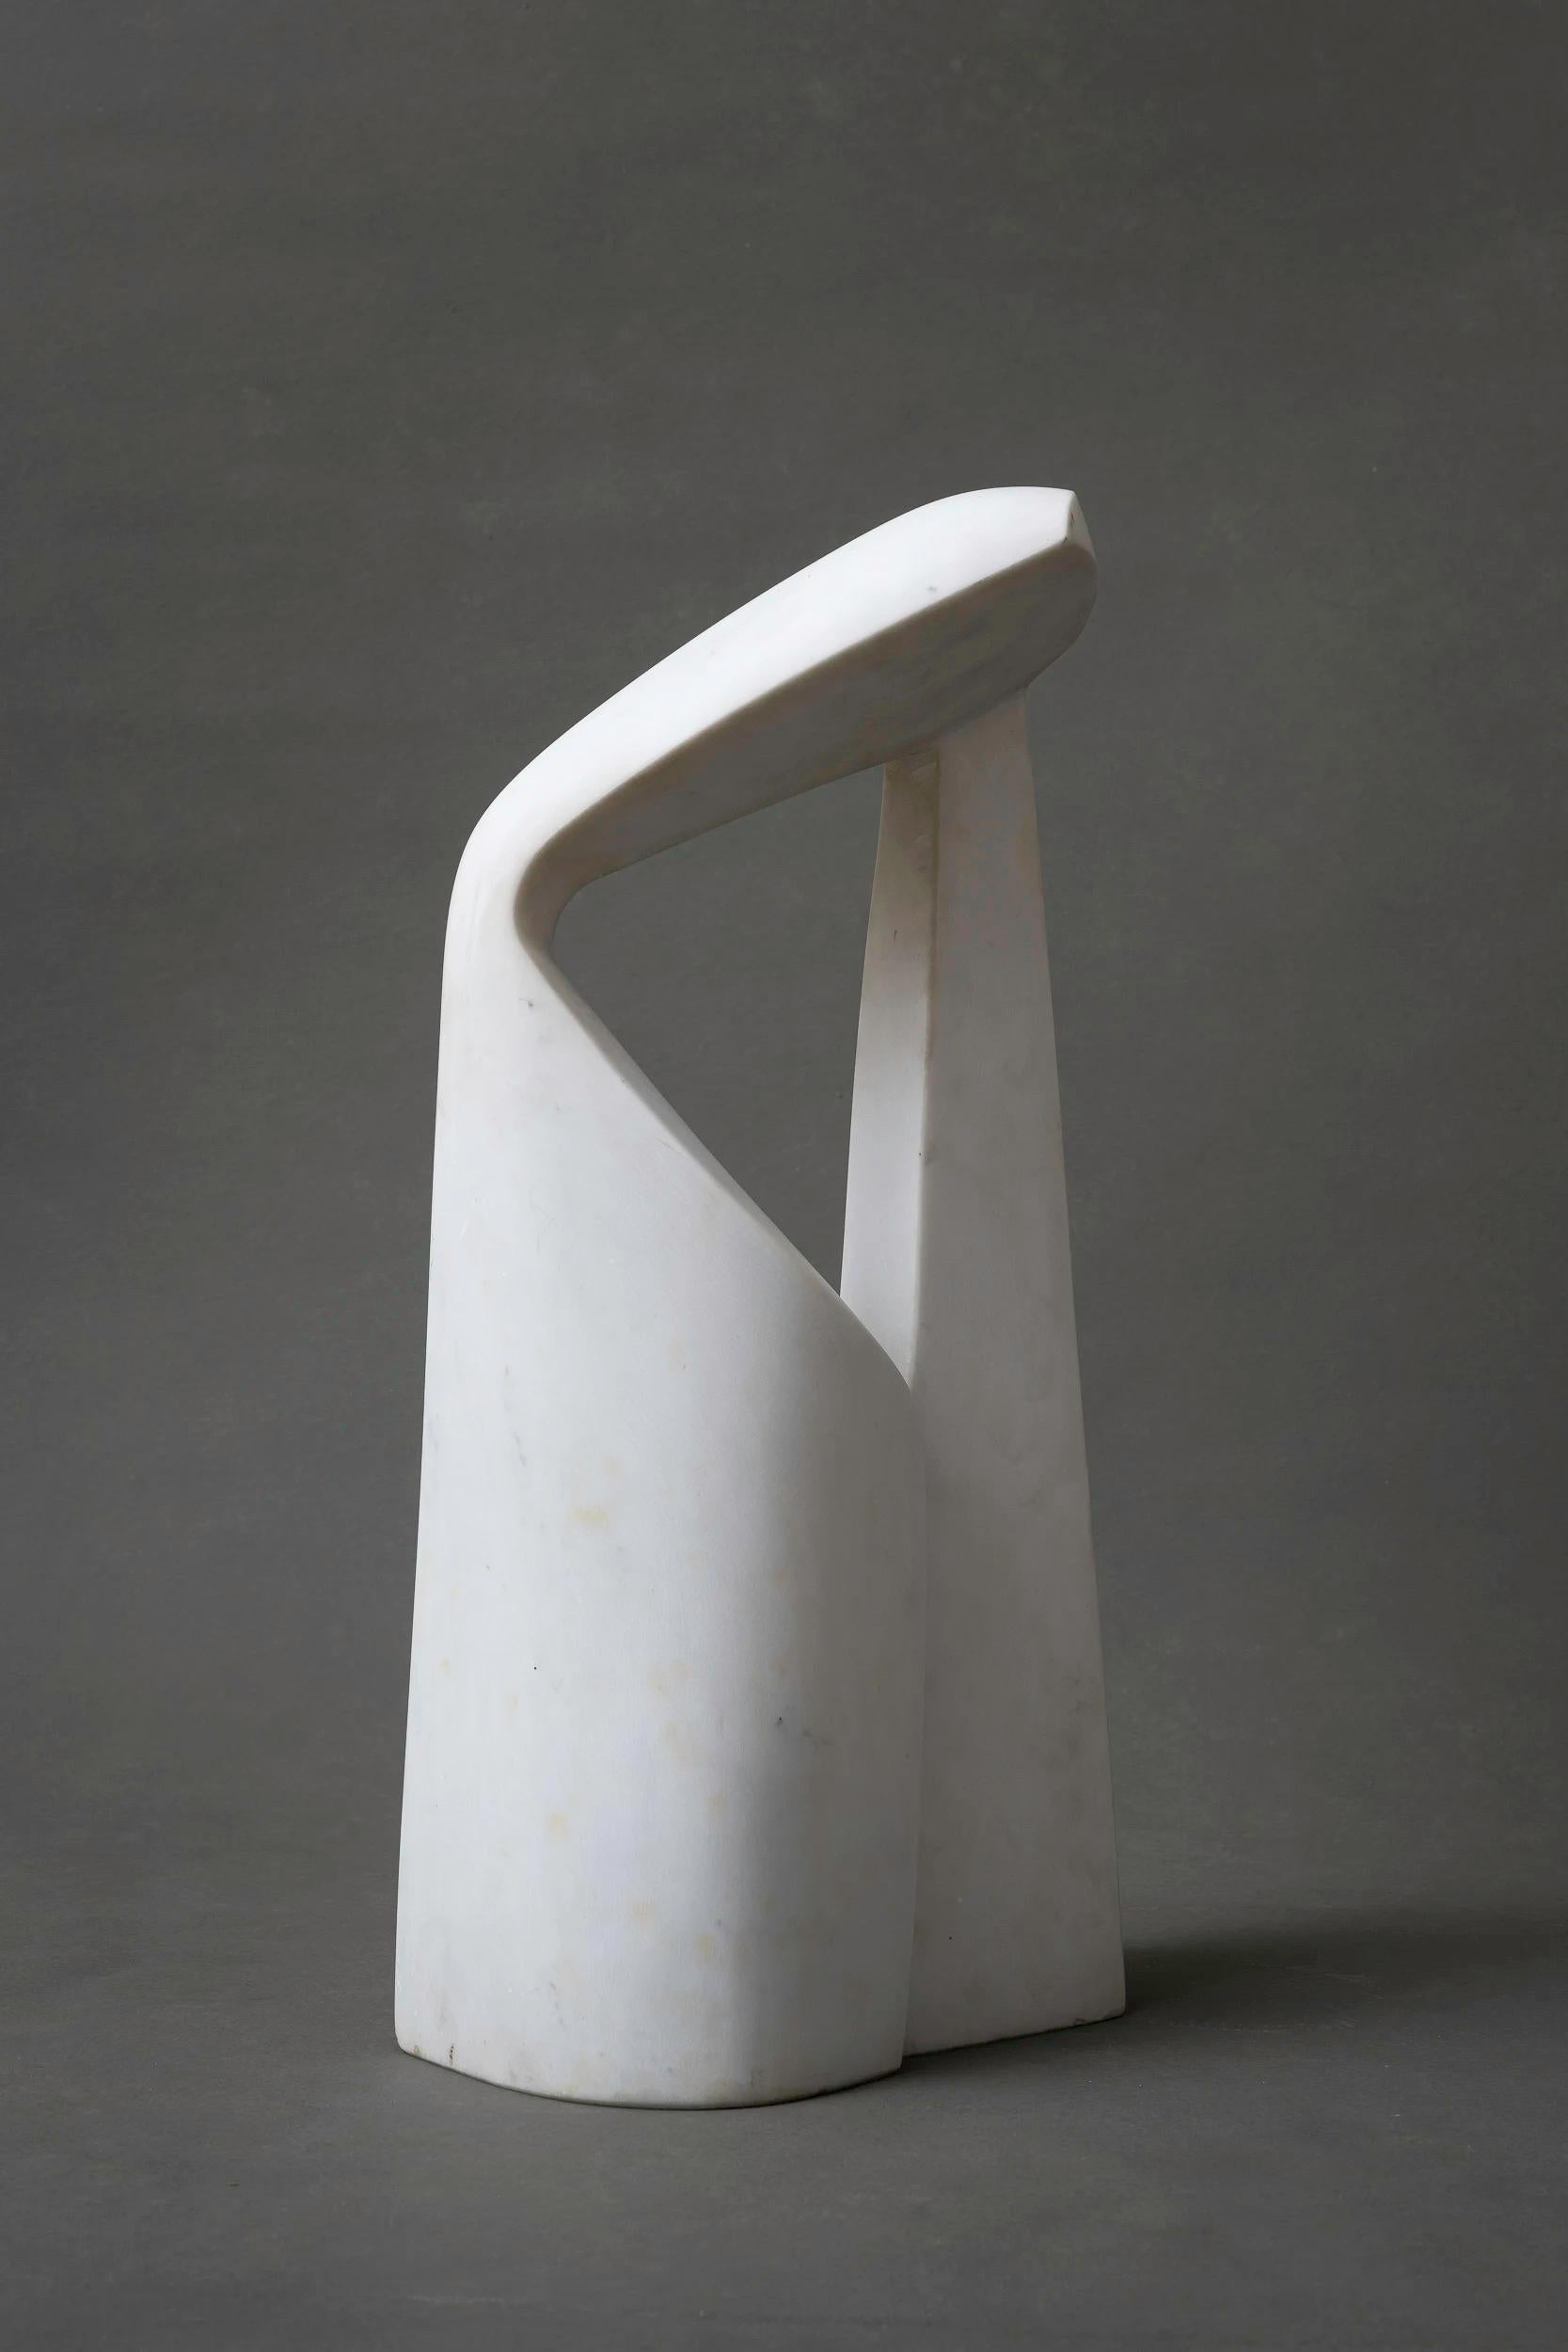 Citadelle sculpture by Bertrand Créac'h, 1993
_______
Sculpture in Carrara marble, unique piece signed.
_______
Dimensions: 
H 55 x 25 x 15 cm
_______
Bertrand Créac'h is a french sculptor. He studied at l’Ecole Boulle in Paris and met the